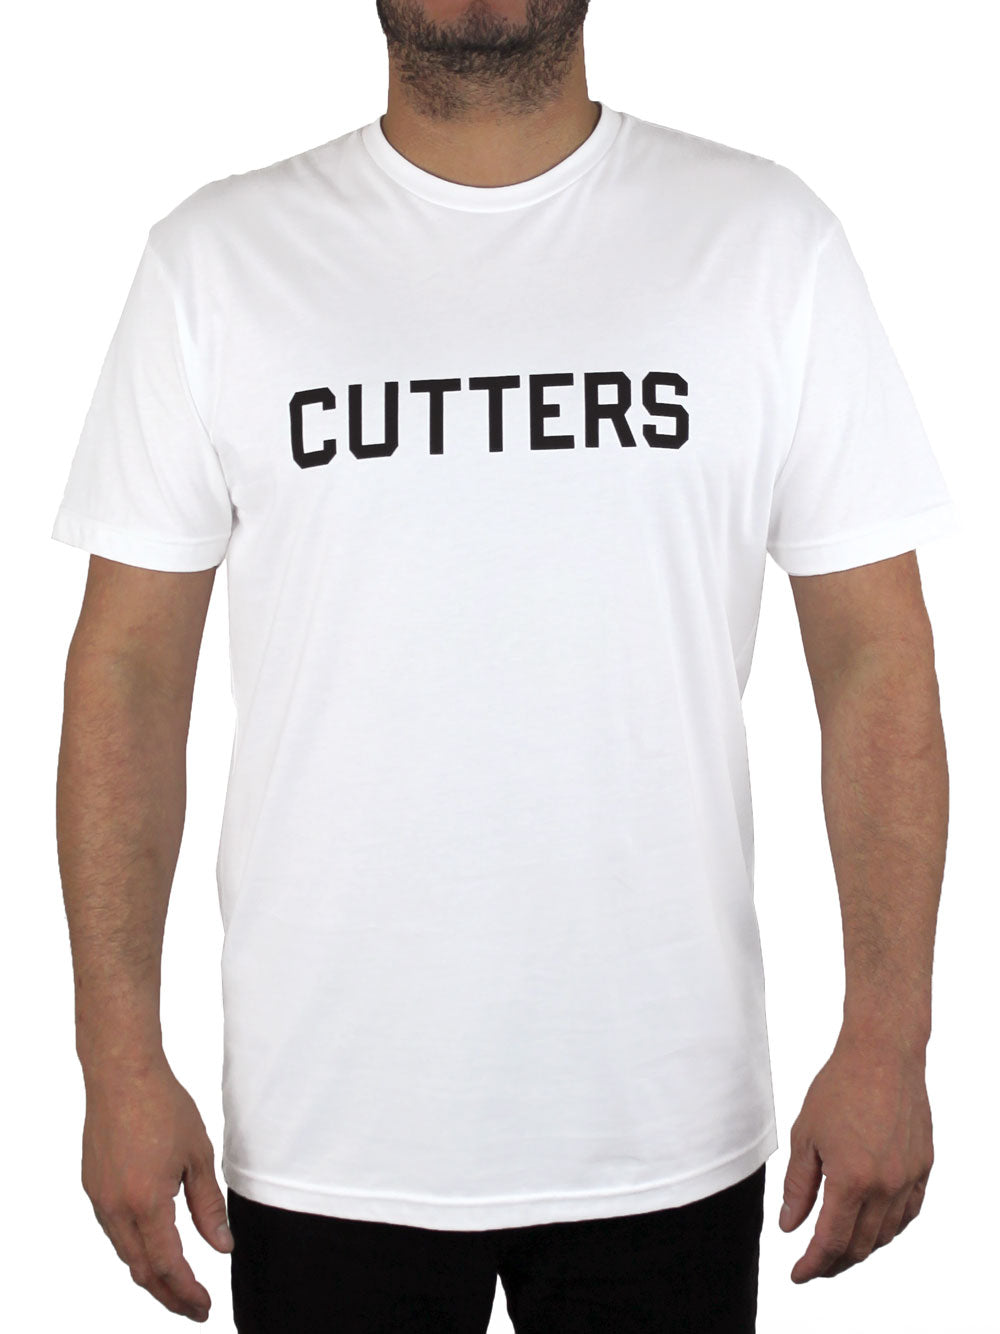 Cutters Shirt Front View